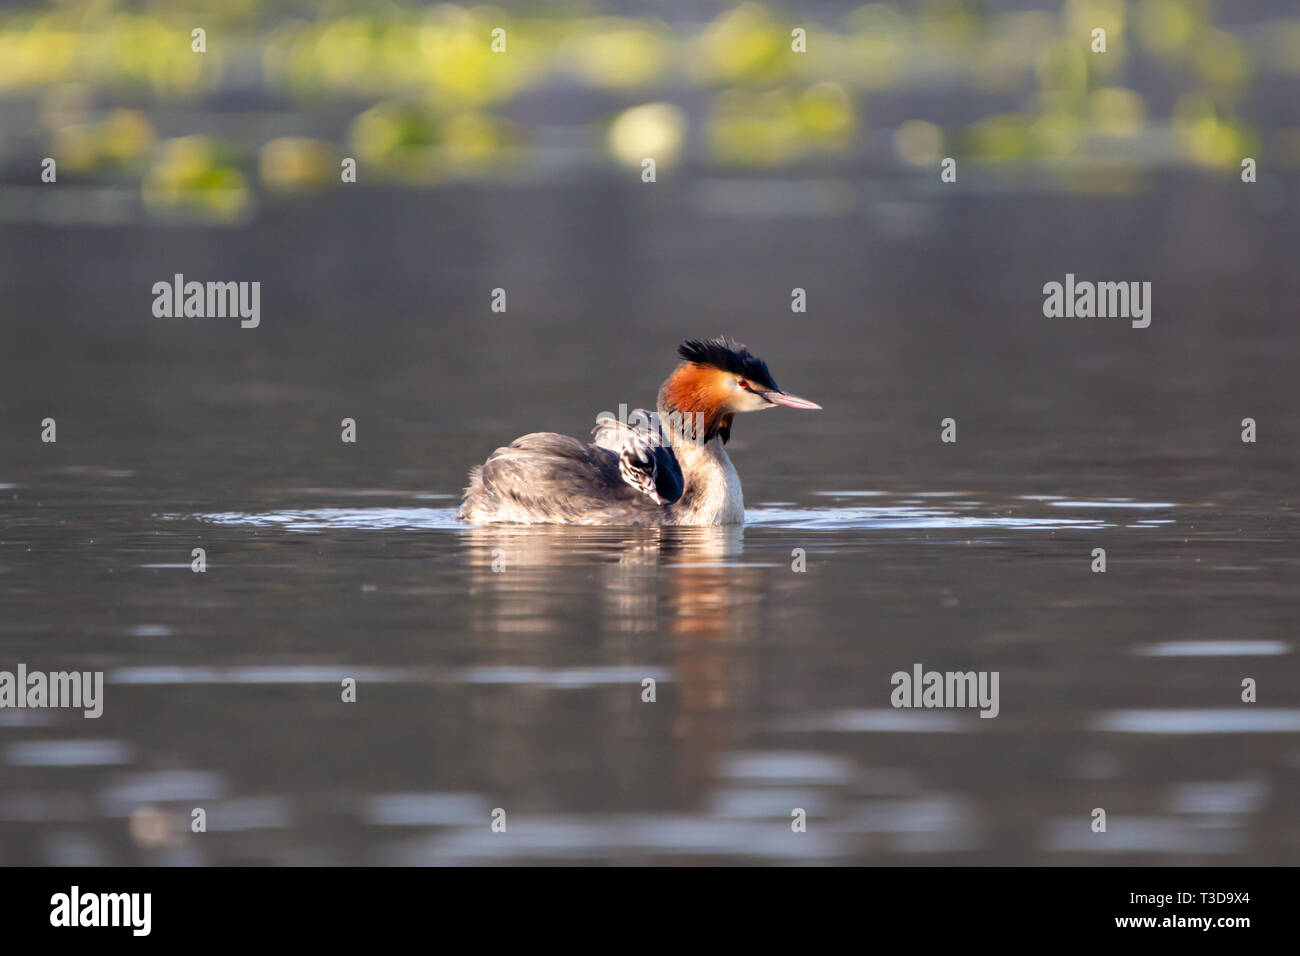 Colour wildlife portrait photograph of adult Great crested grebe (Podiceps cristatus) with chick on back whilst swimming on water. Taken on Hatchpond, Stock Photo